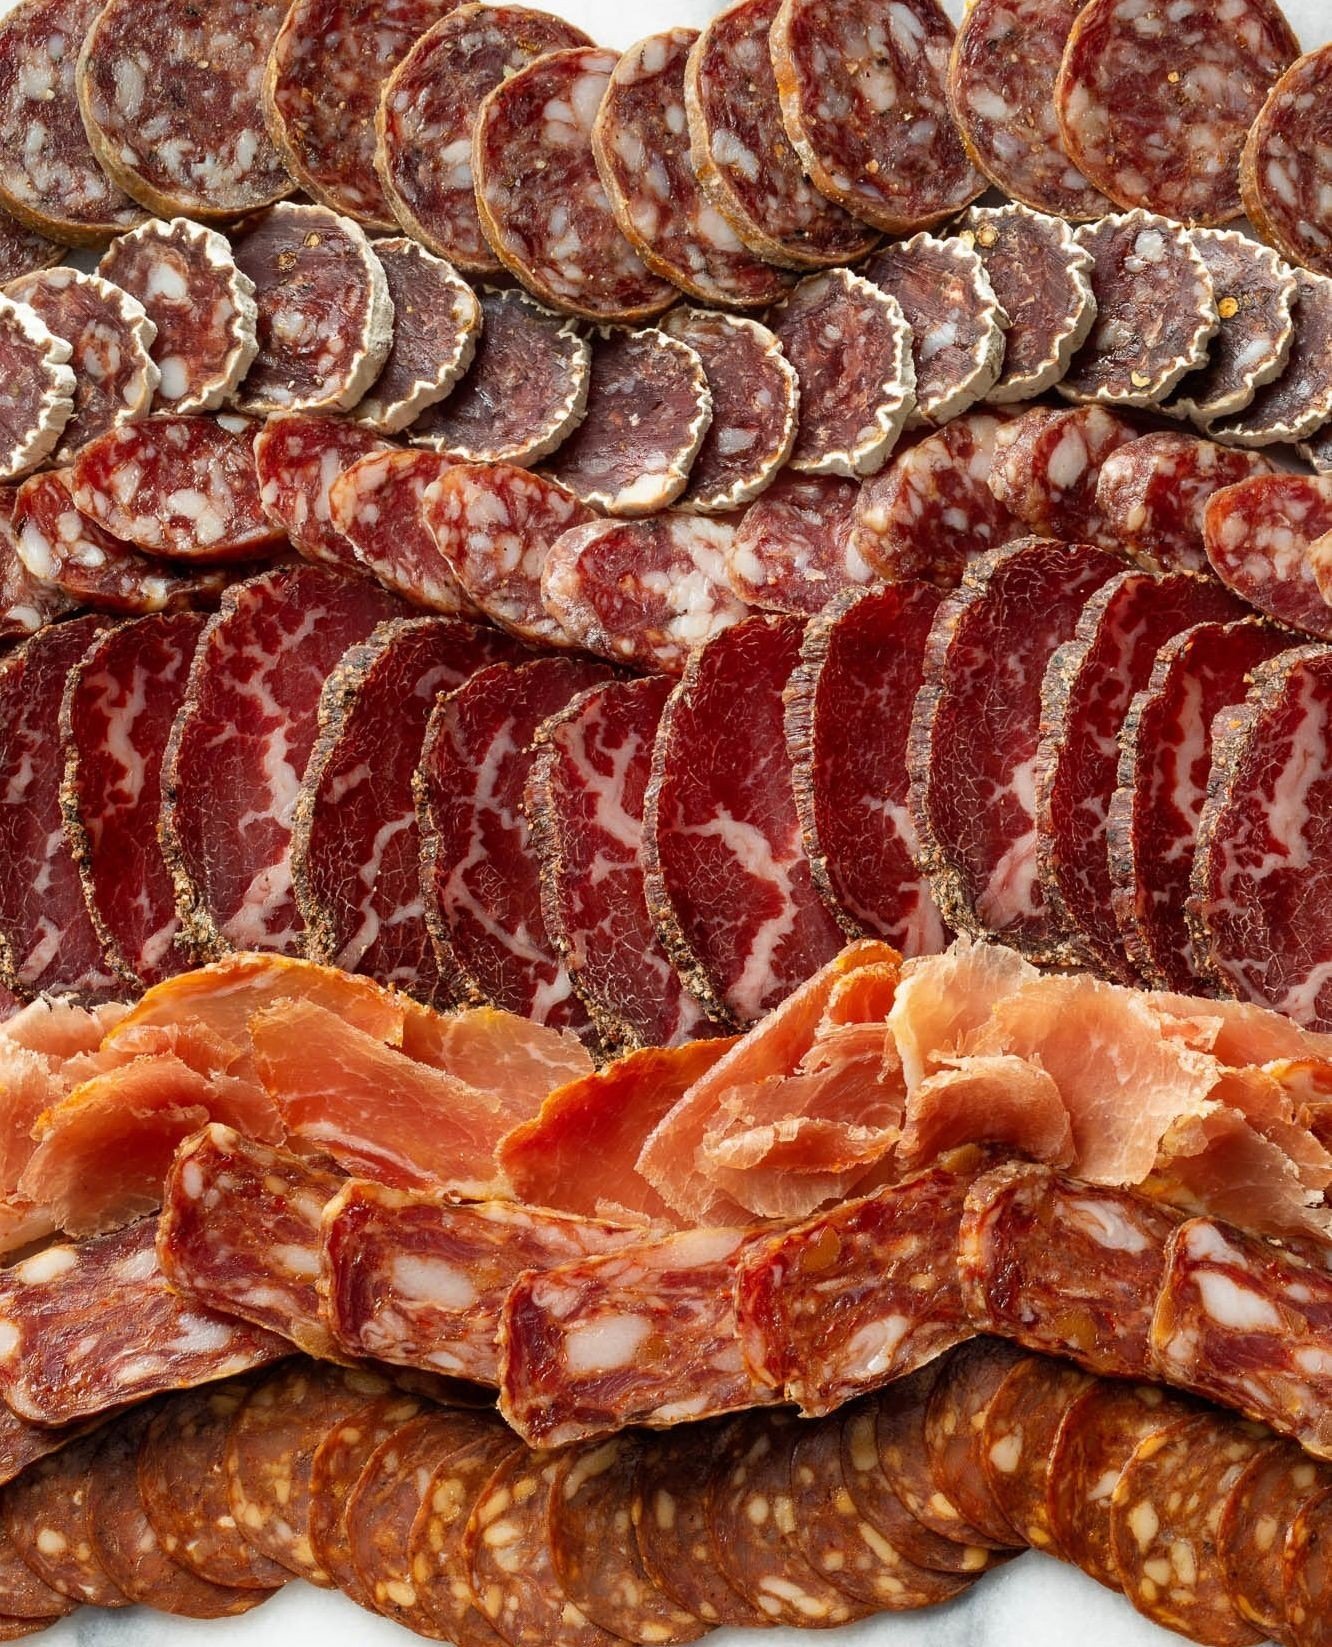 Still thinking about this mesmerizing charcuterie &ldquo;meat wave!&rdquo; (Martha Reeves &amp; The Vandellas circa 1963, anyone?)